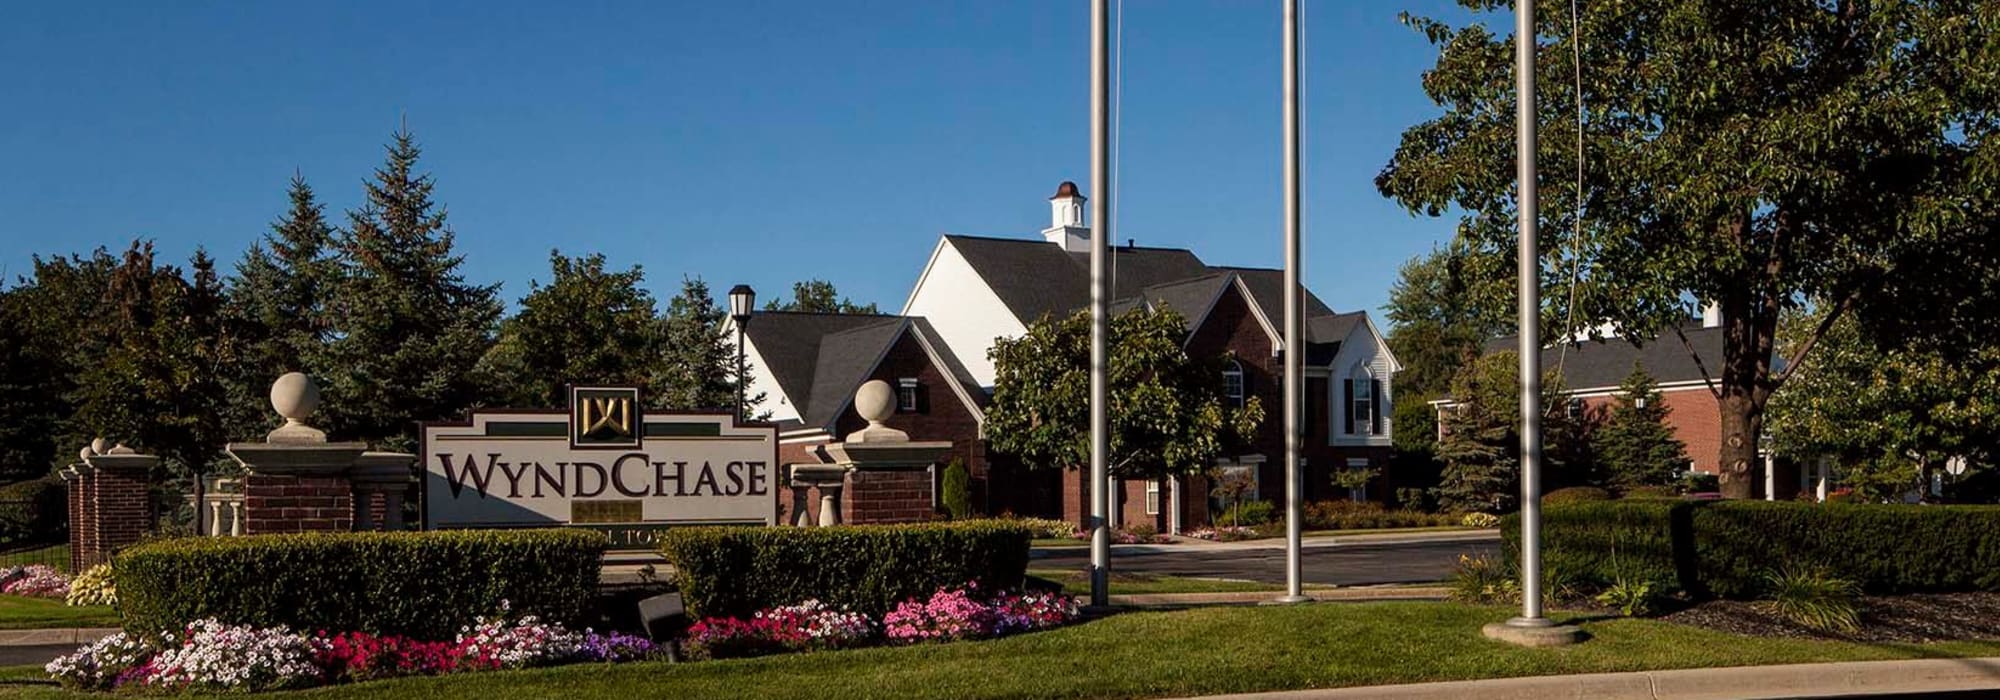 East Canton Apartments Townhomes For Rent Wyndchase